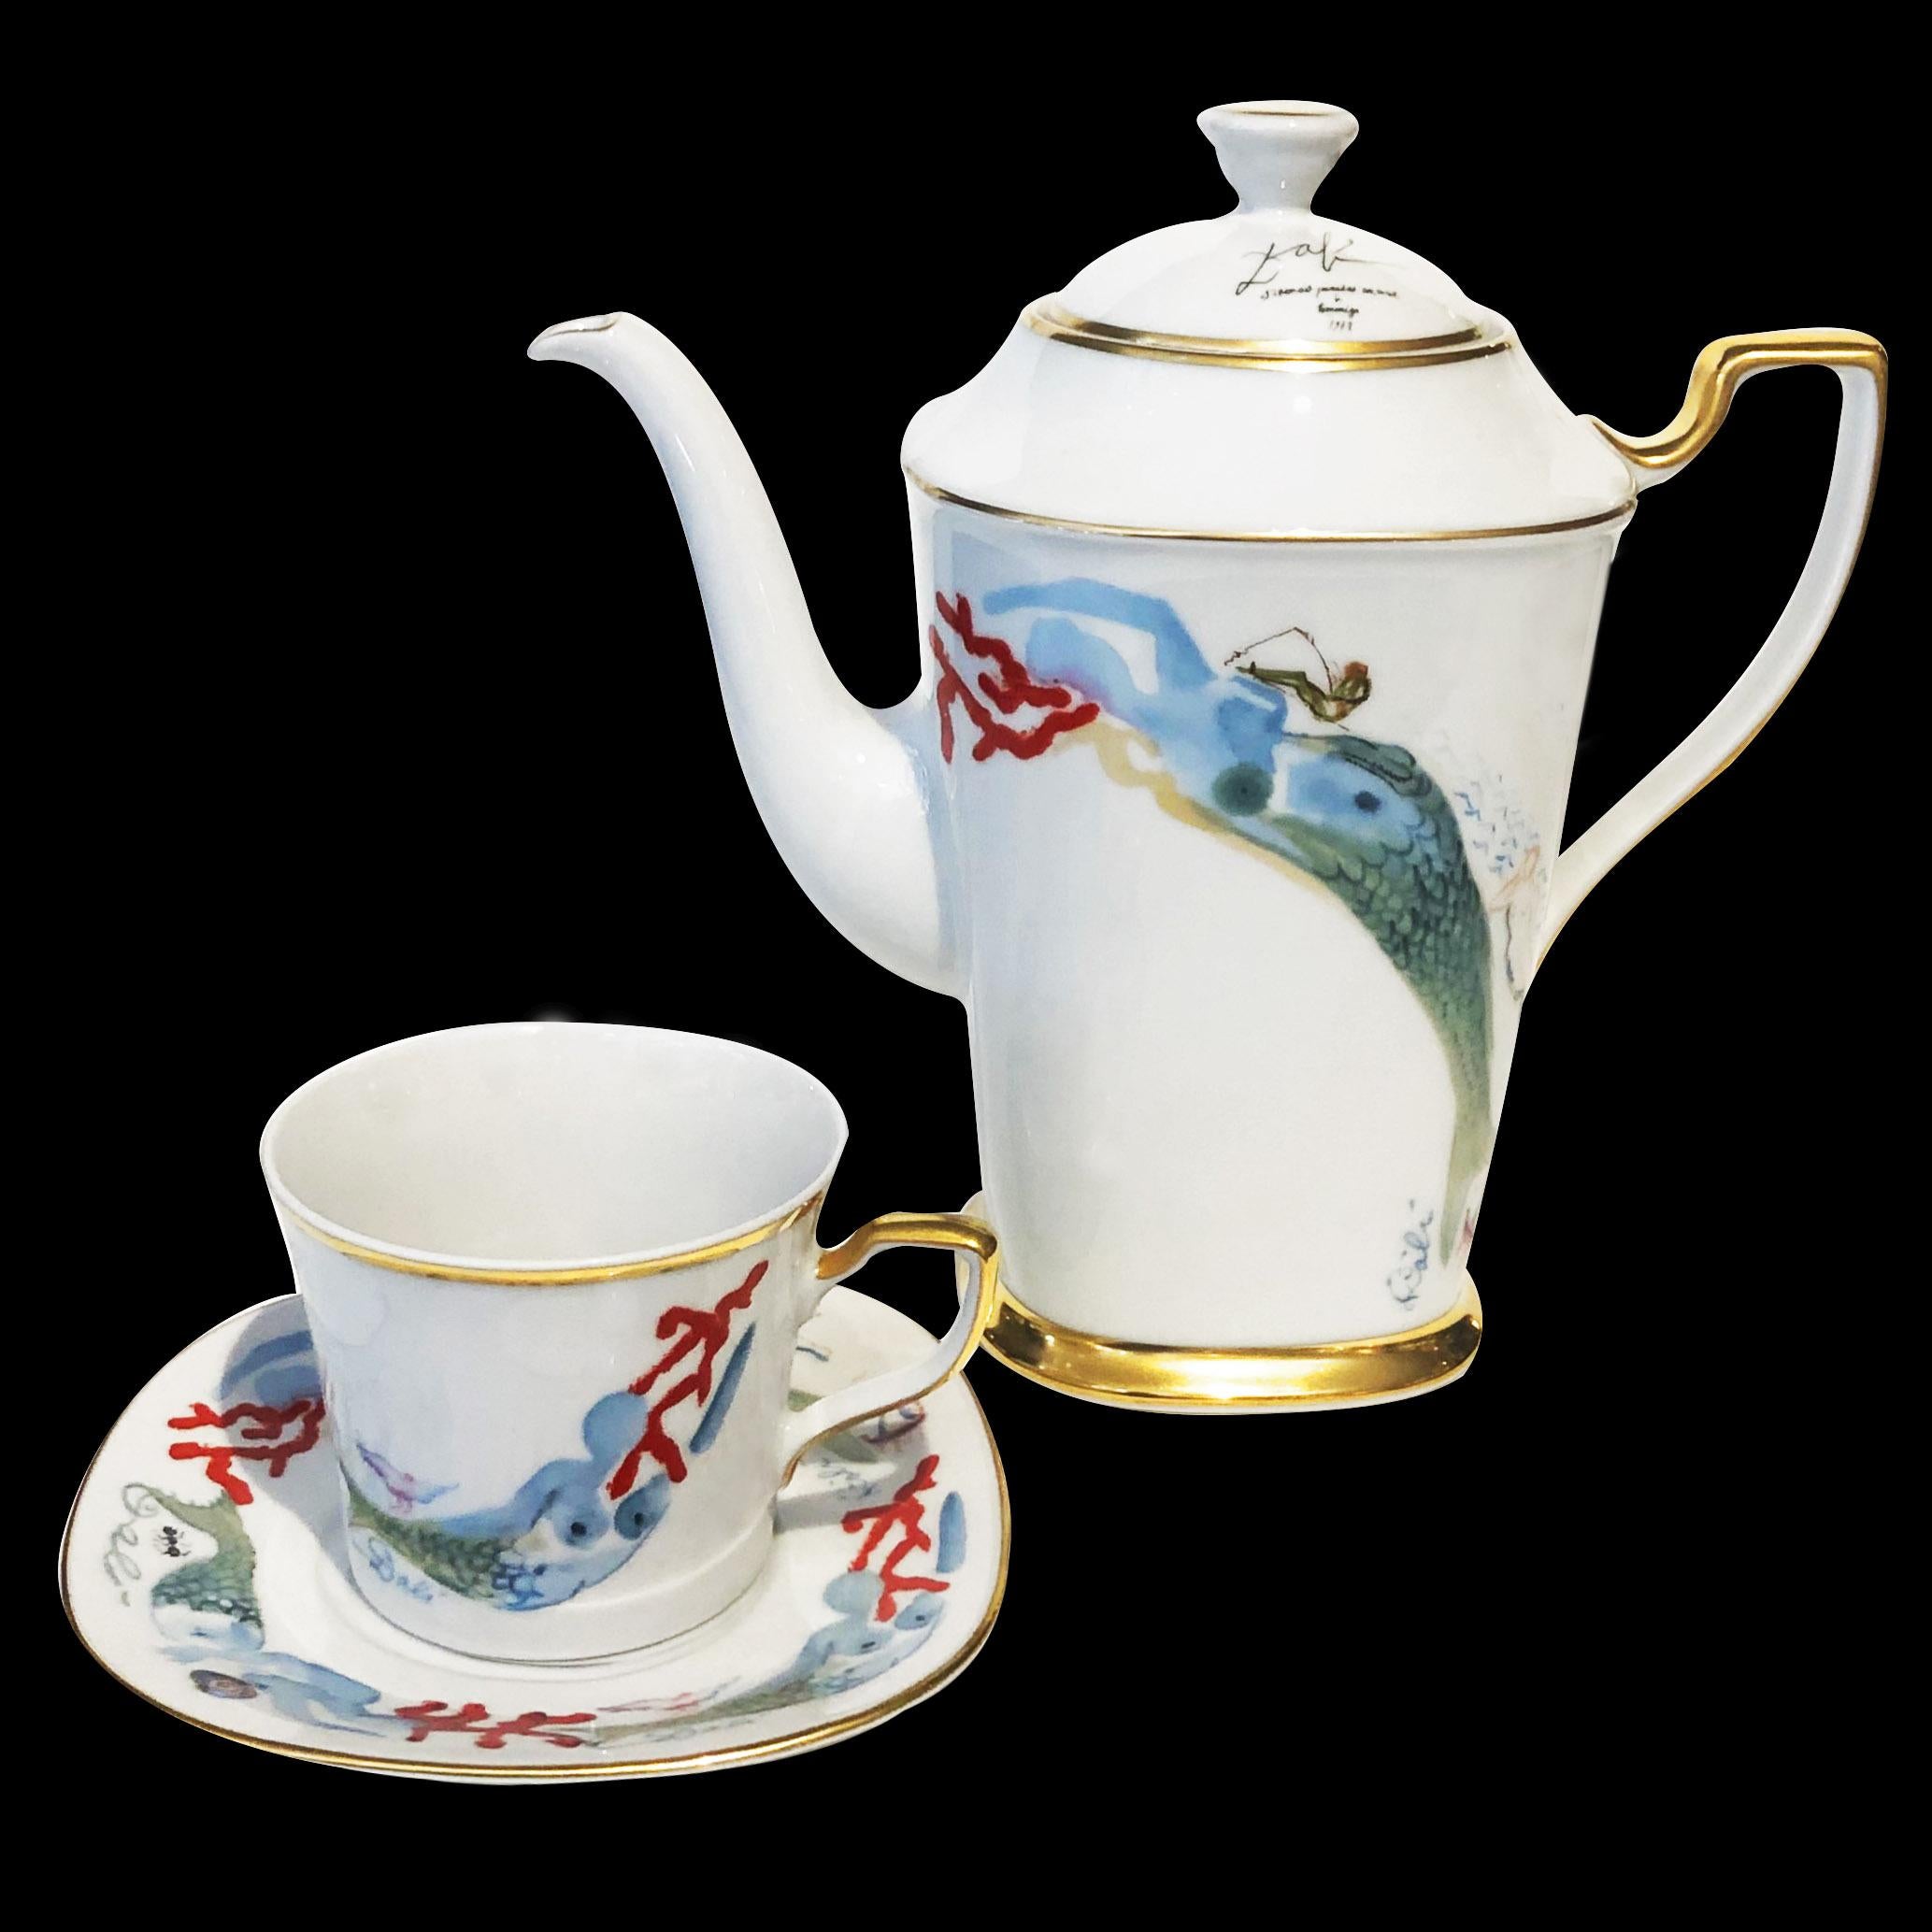 Salvador Dalí (1904-1989) world-famous Spanish painter, graphic artist, and sculptor of surrealism, designed this porcelain limited edition painted 19 pieces of coffee service porcelain with 24-karat gold trim in 1977.
Plate signed; on front and